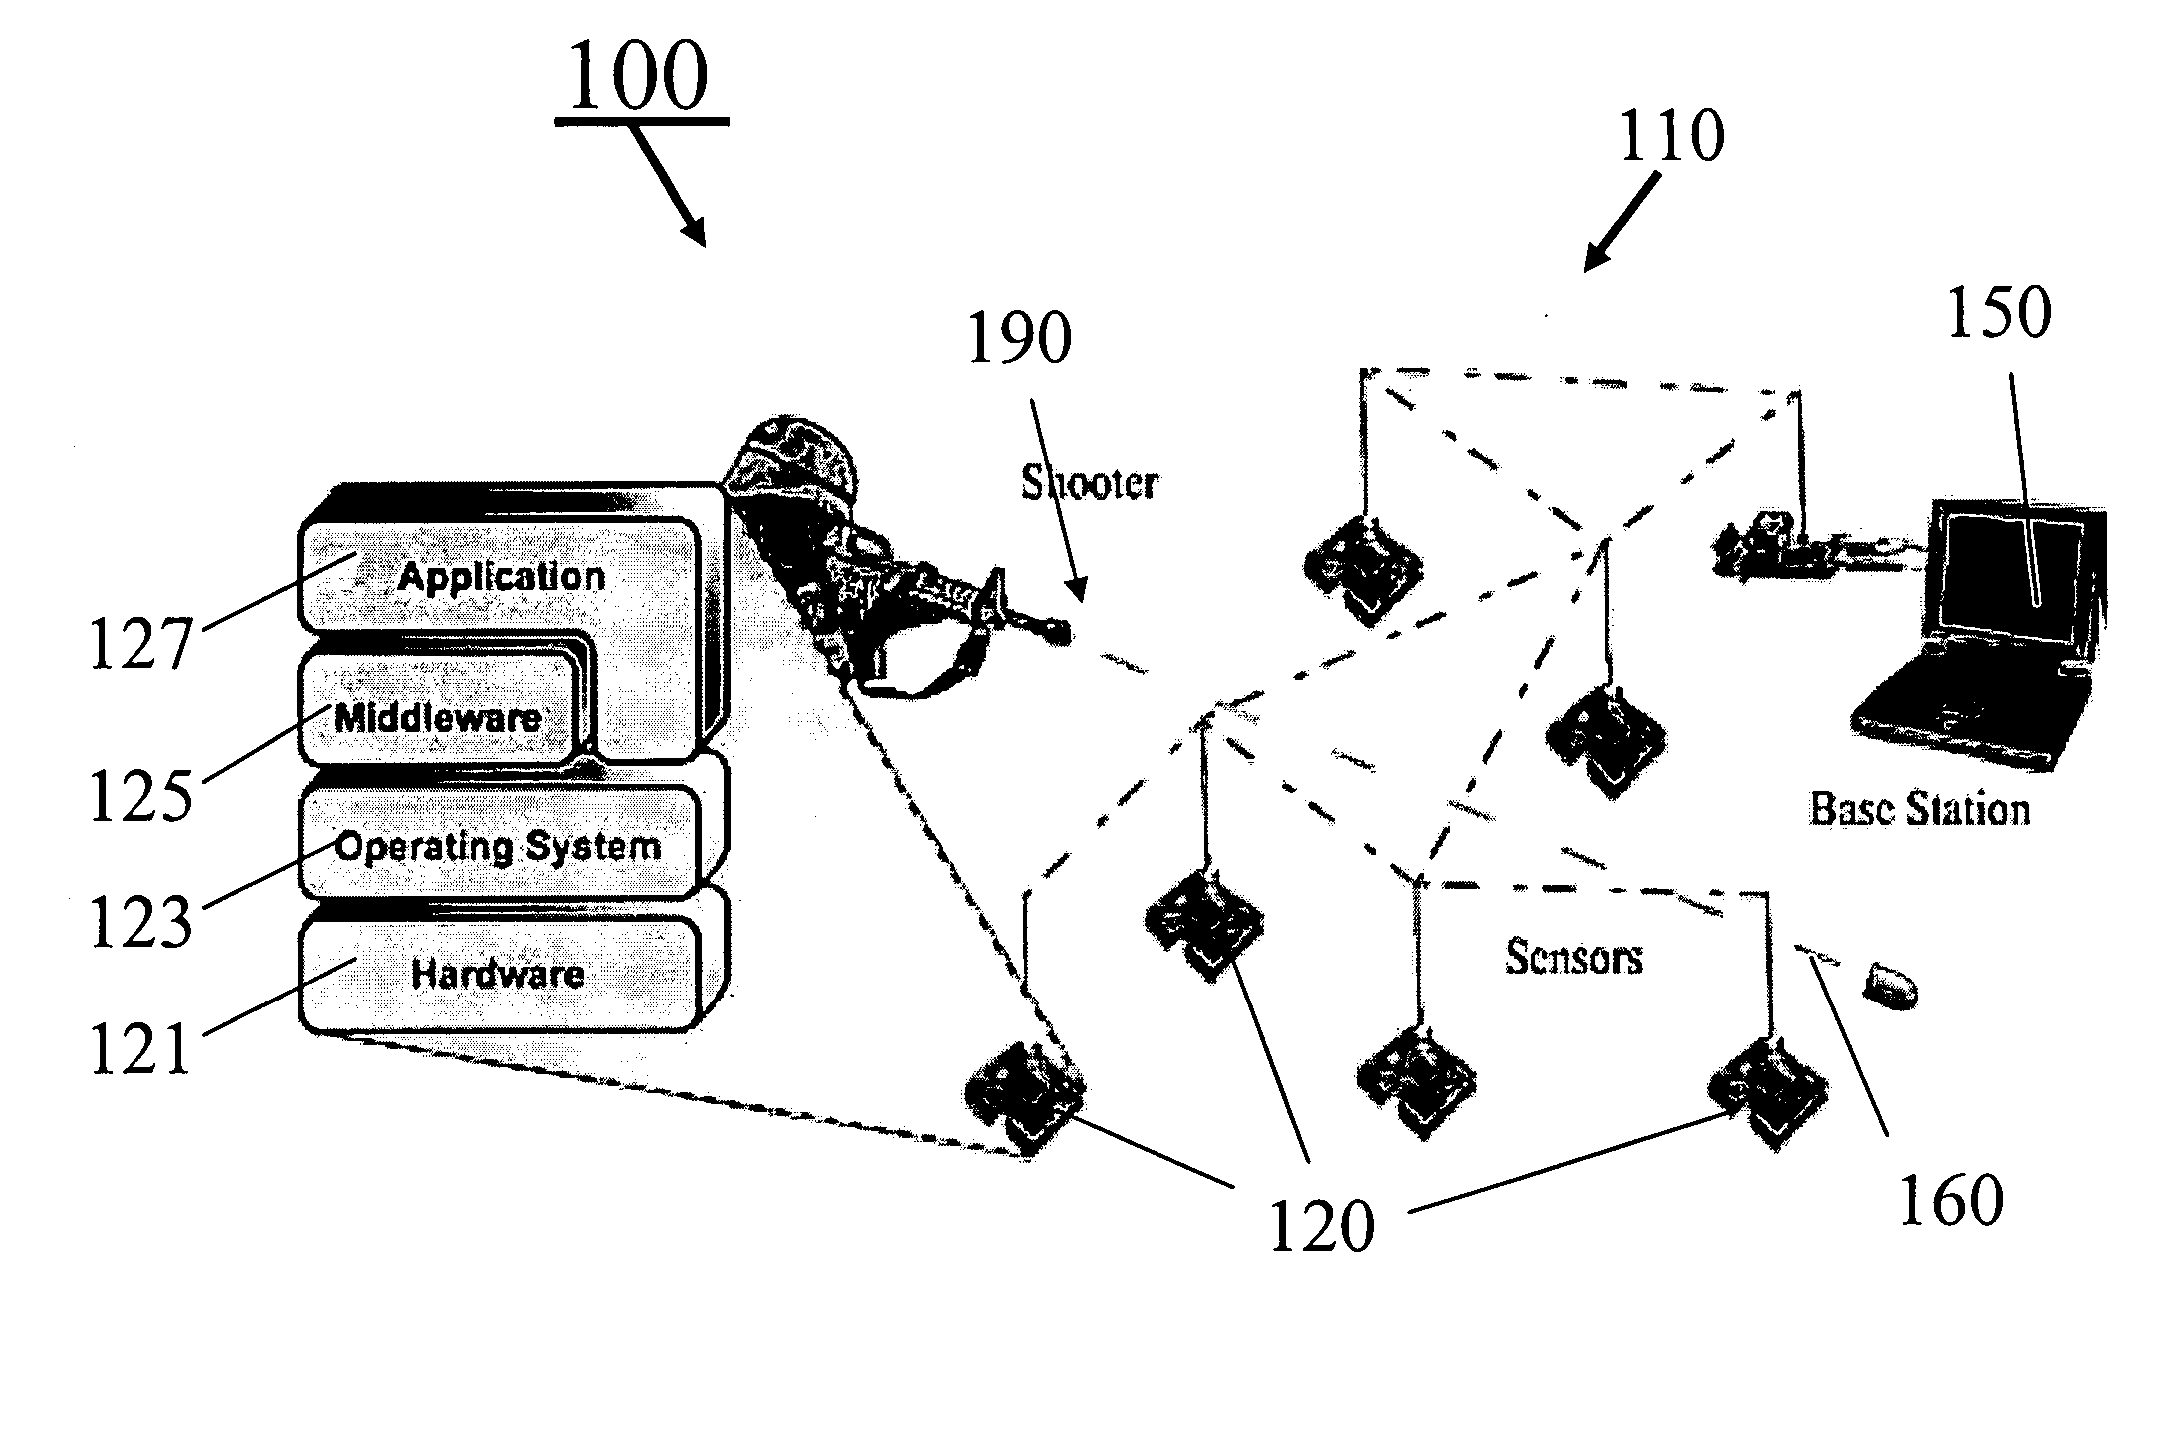 Acoustic source localization system and applications of the same